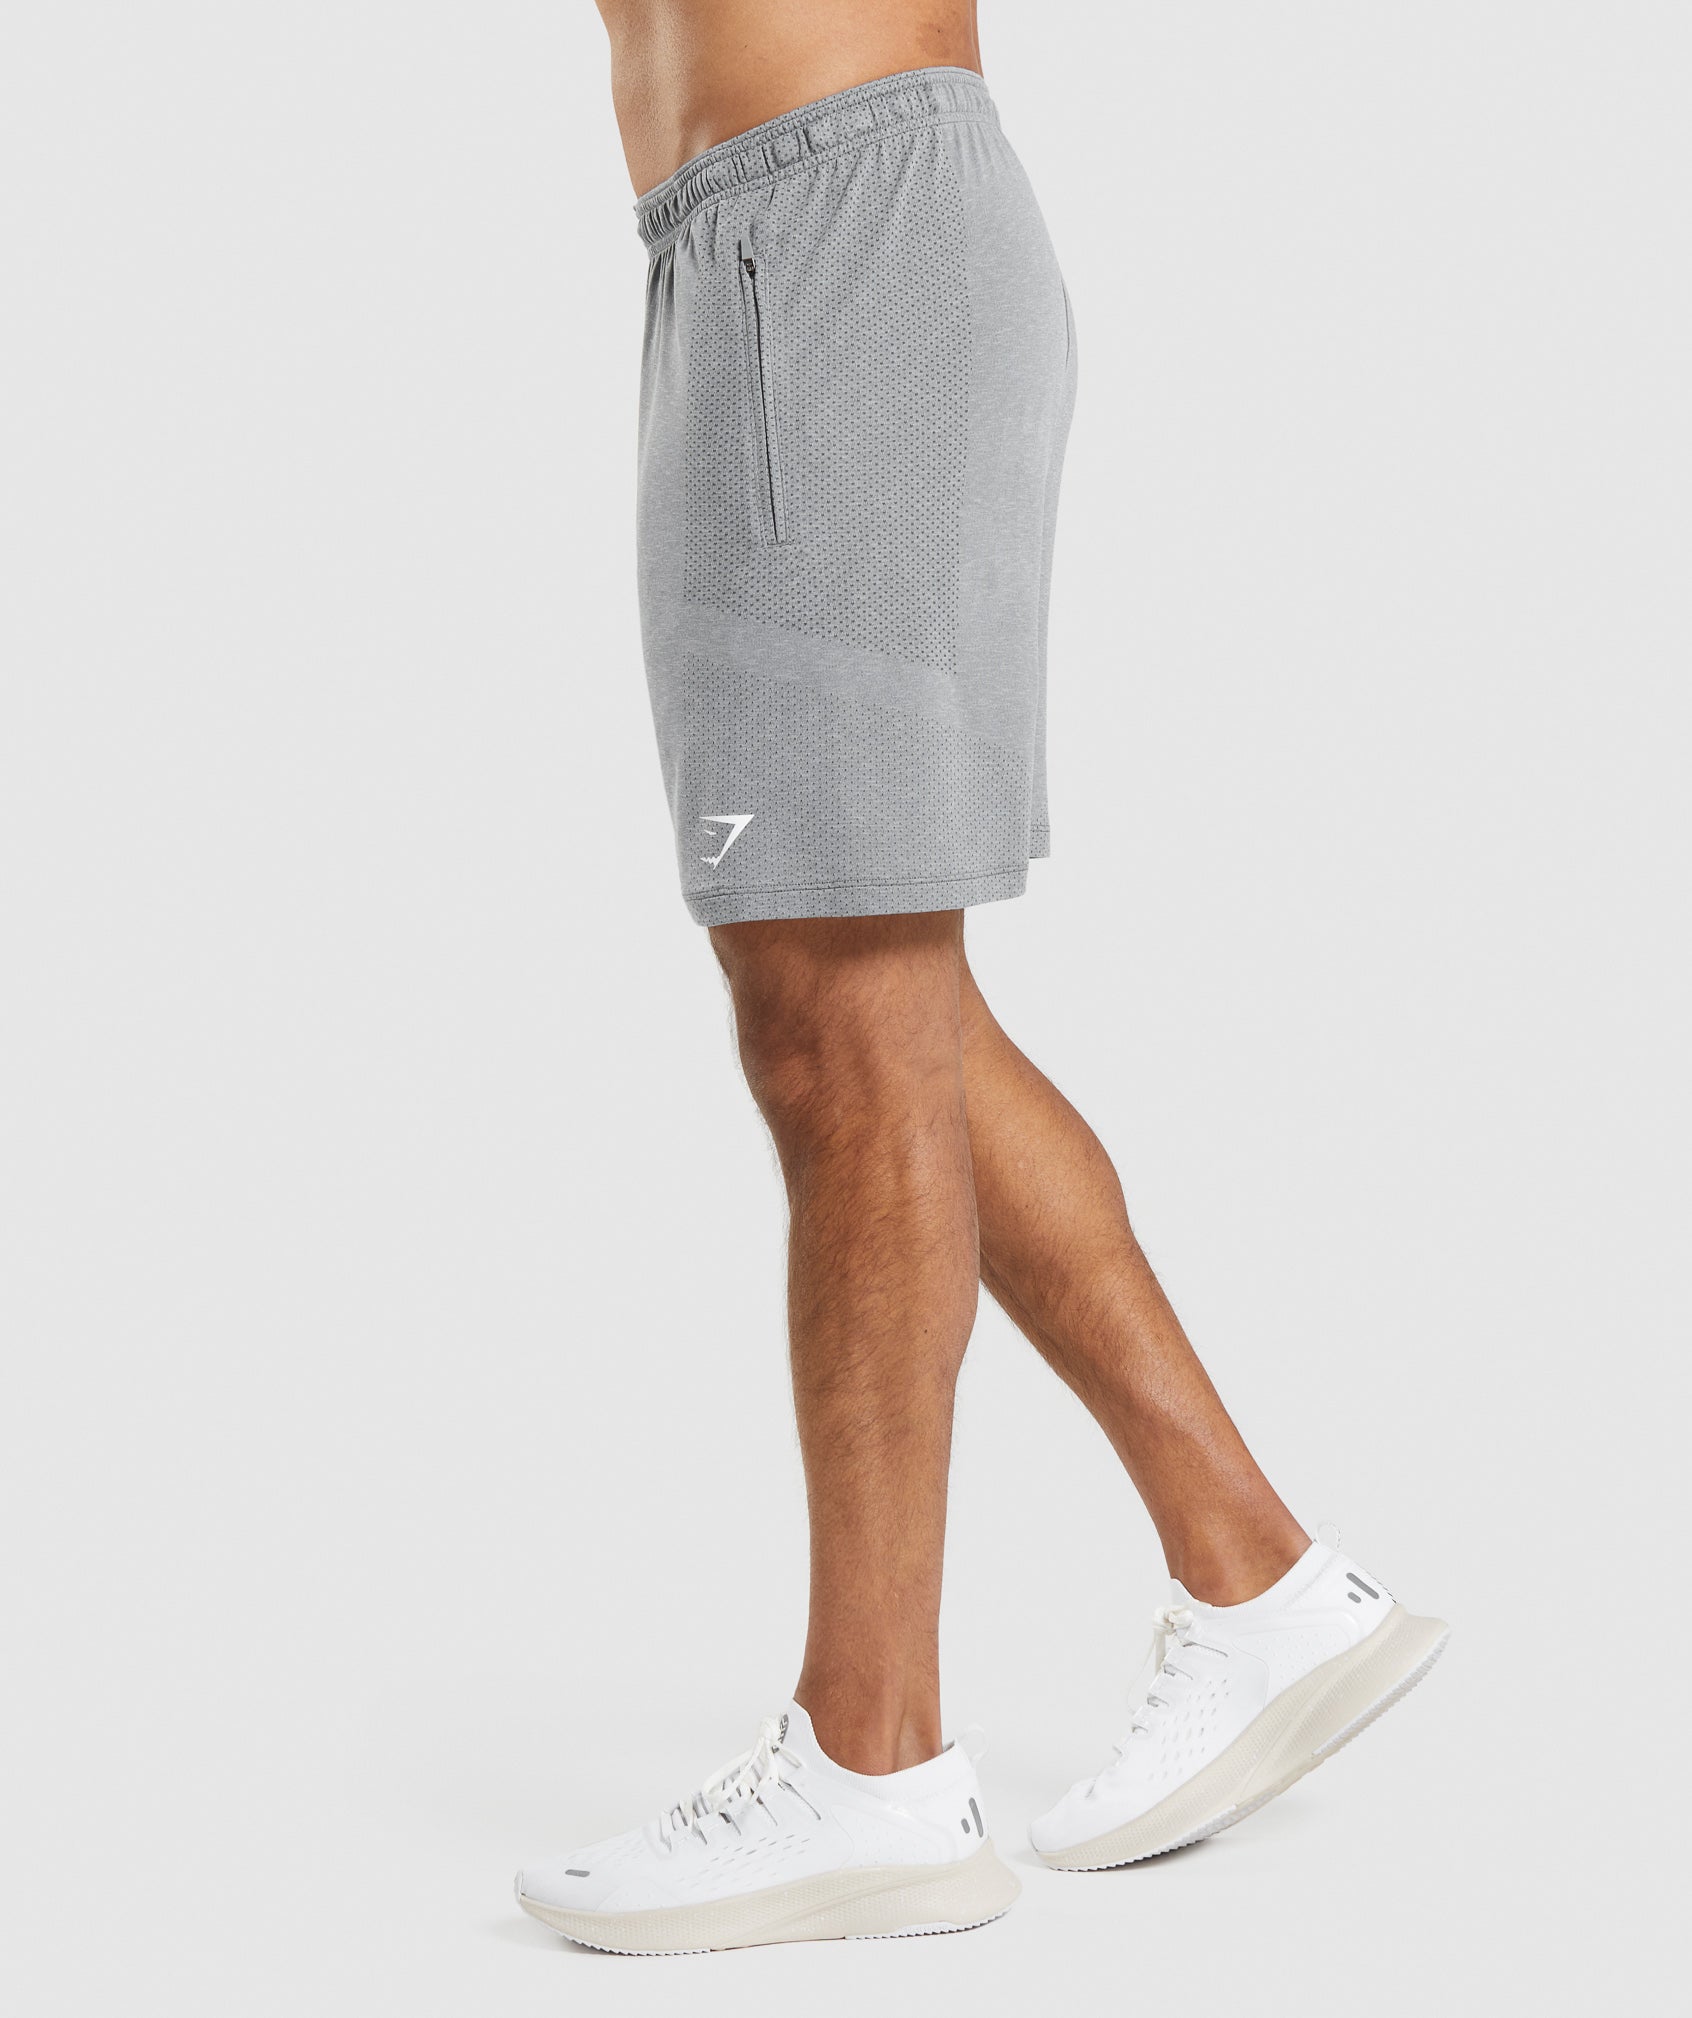 Vital Light Shorts in Charcoal Grey Marl - view 3